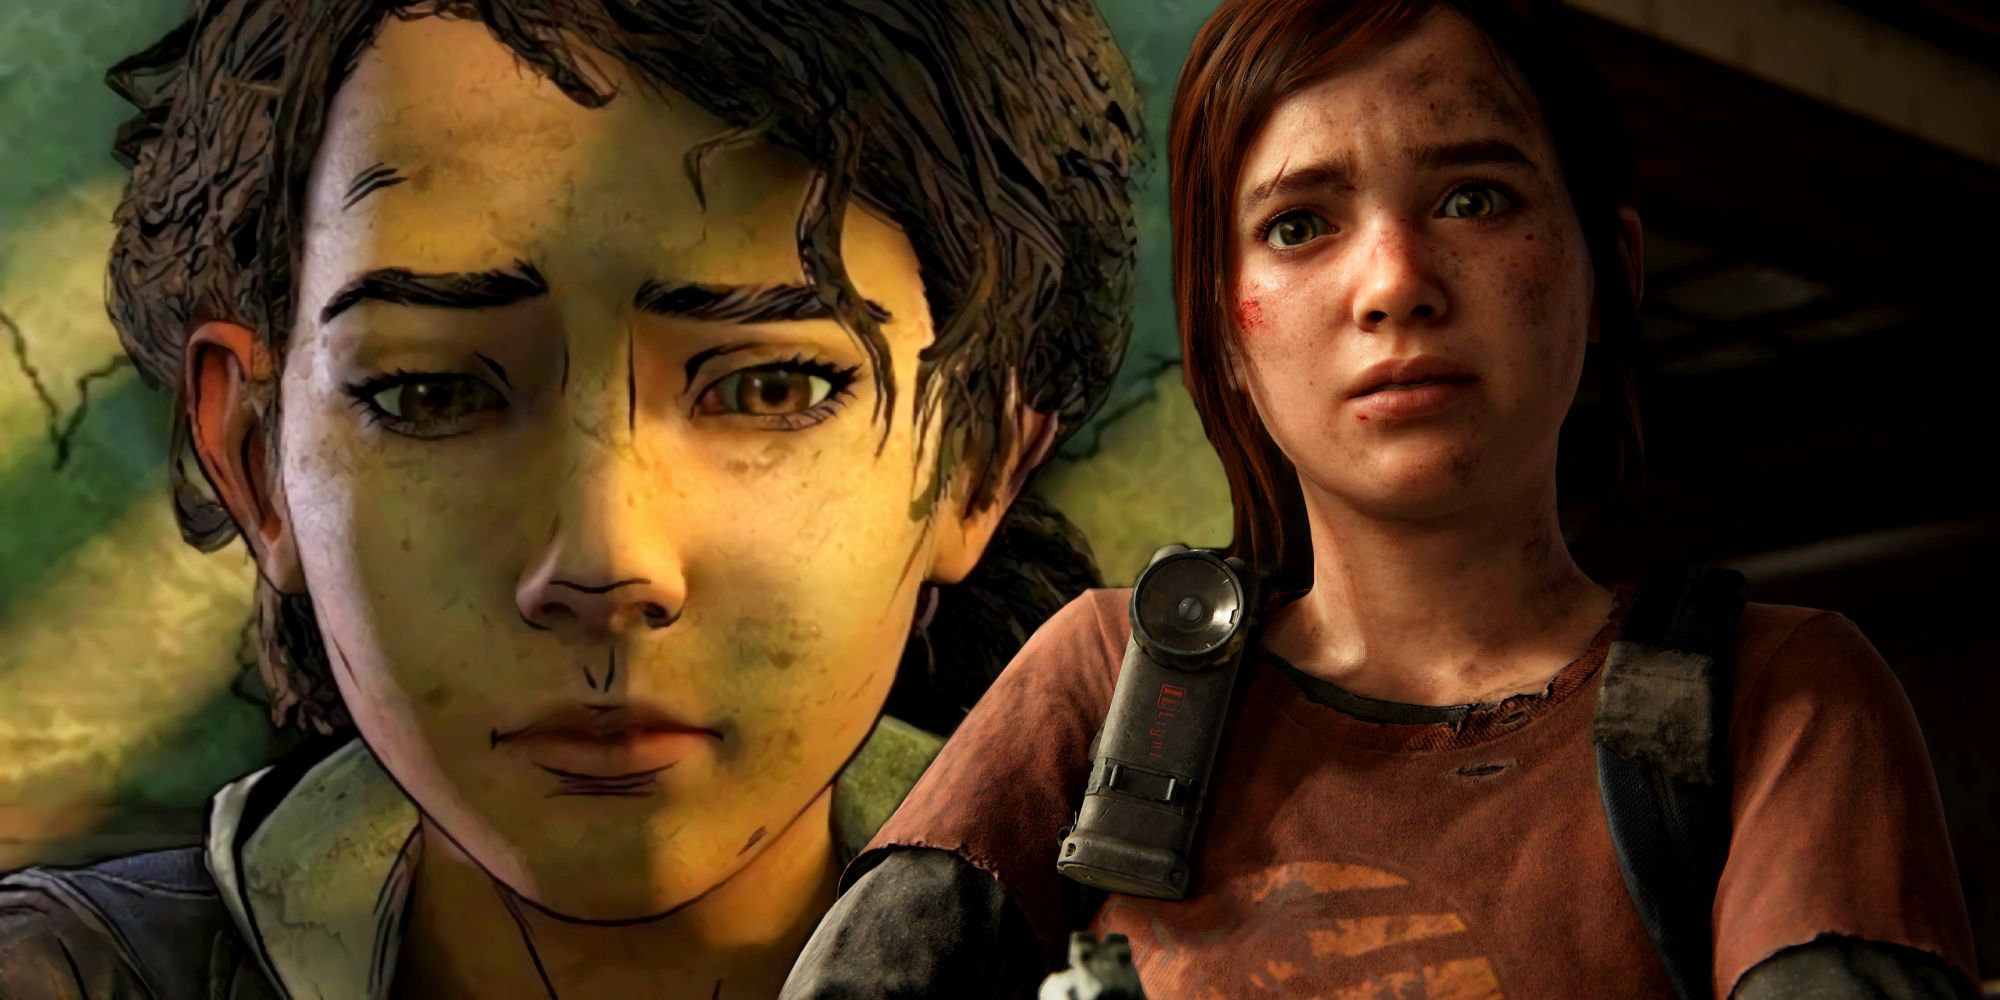 Clementine from Telltale's The Walking Dead, and Ellie from The Last of Us.